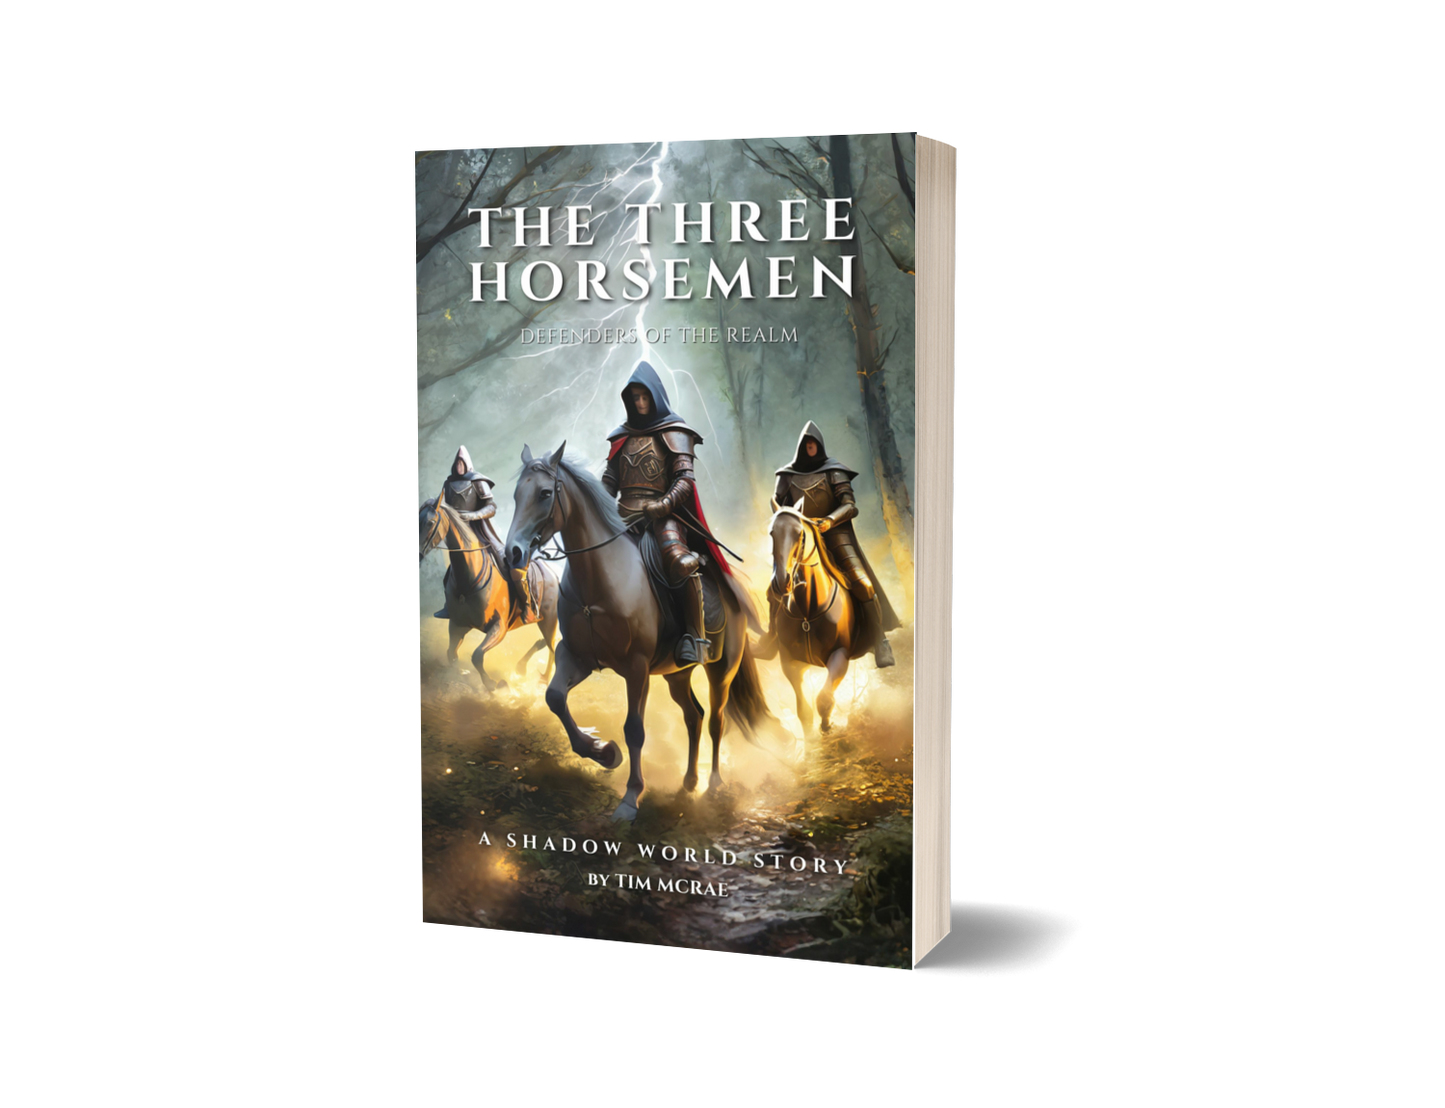 The Three Horsemen - A Shadow World Story - Free to download!